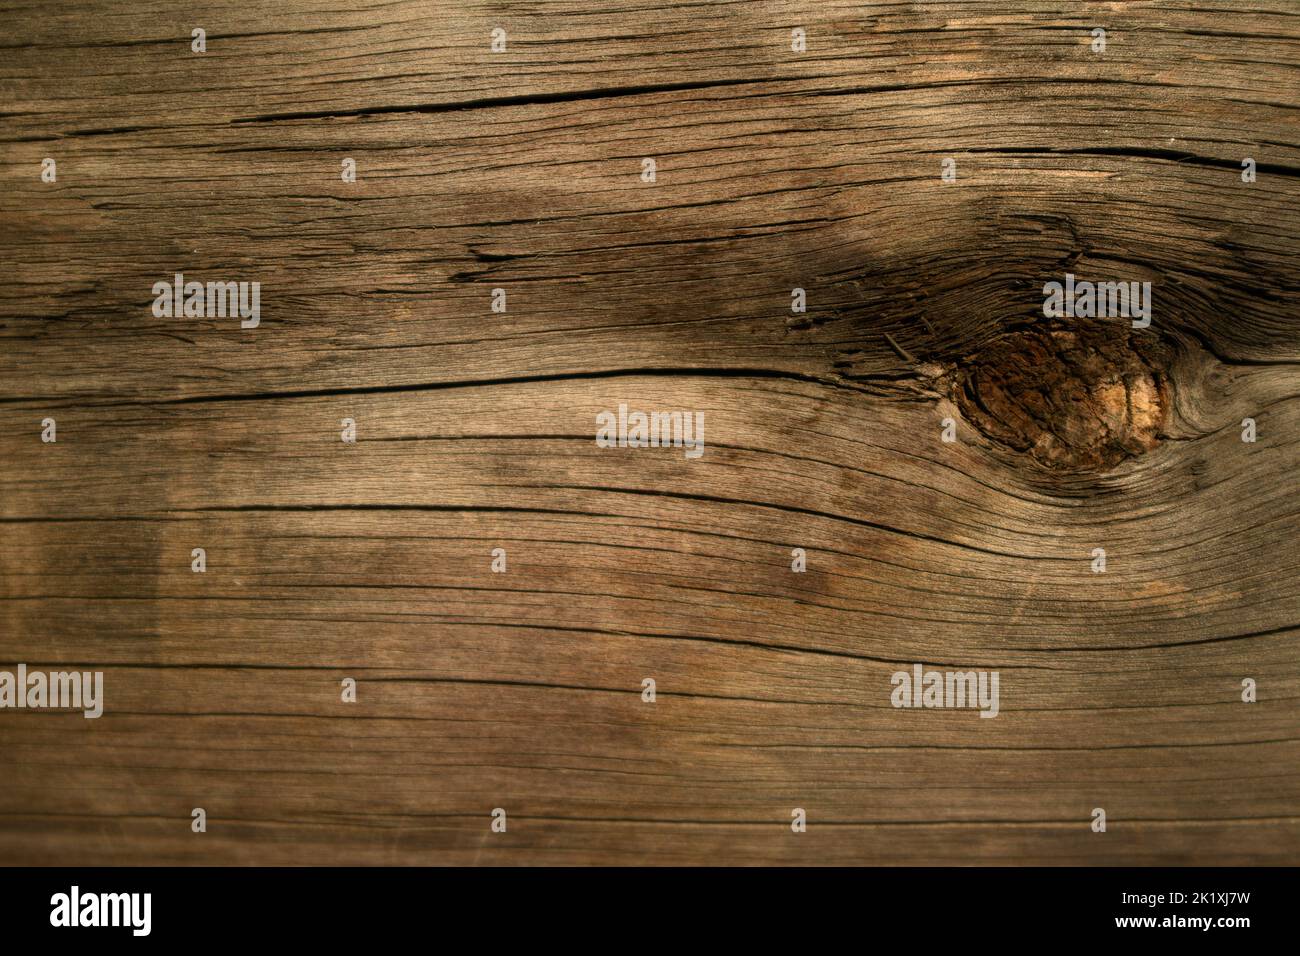 Close-up of weathered wood showing a knot from the tree it came from, ideal natural-looking background for illustrating natural themes Stock Photo